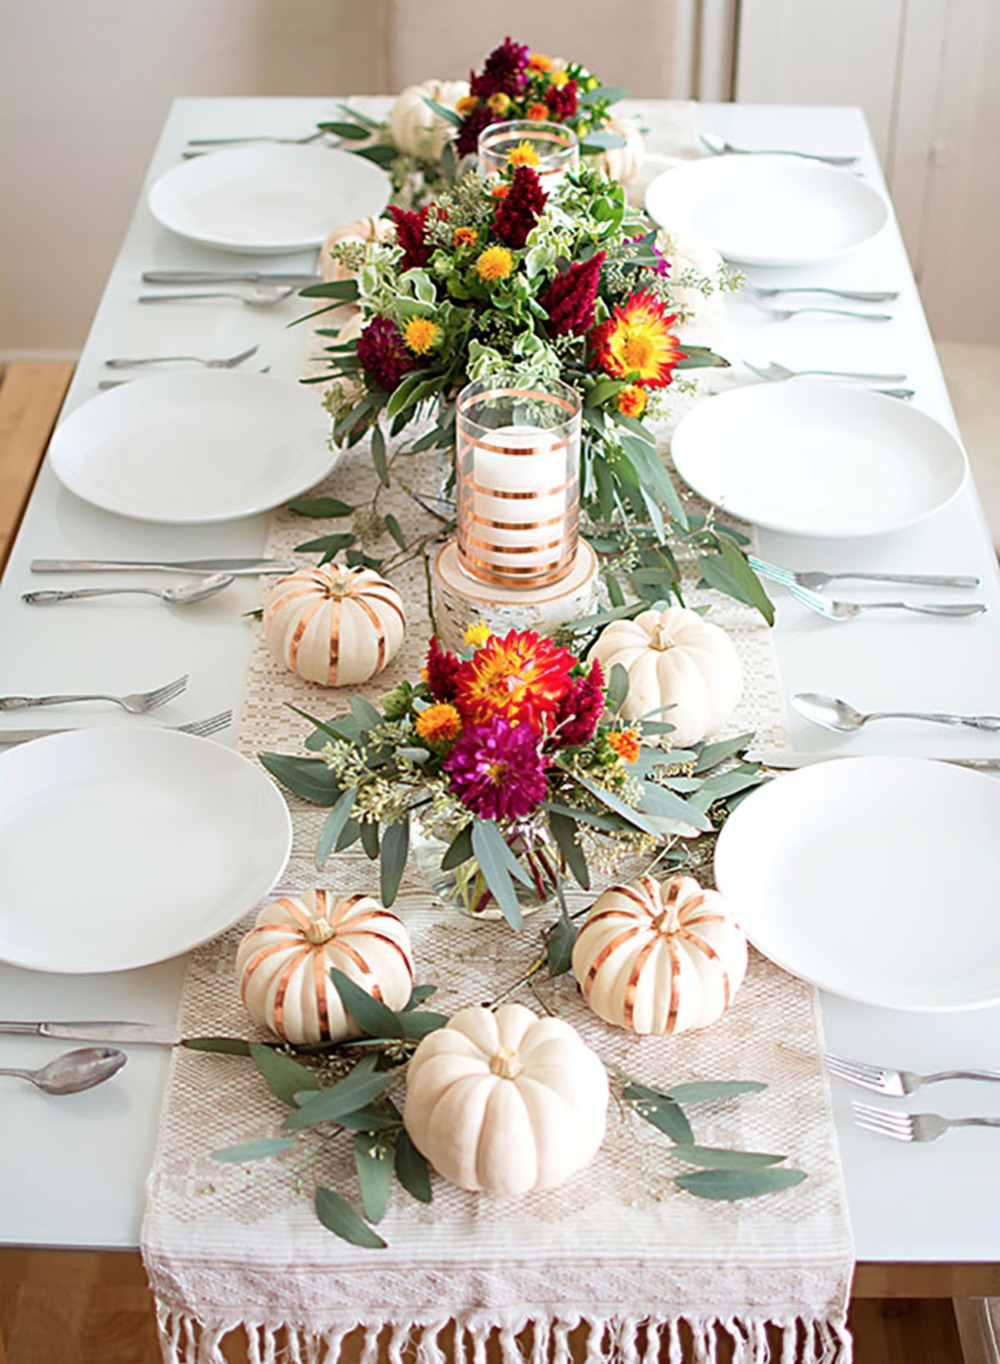 26 Ideas On How To Transform Your Thanksgiving Table - Weddingchicks